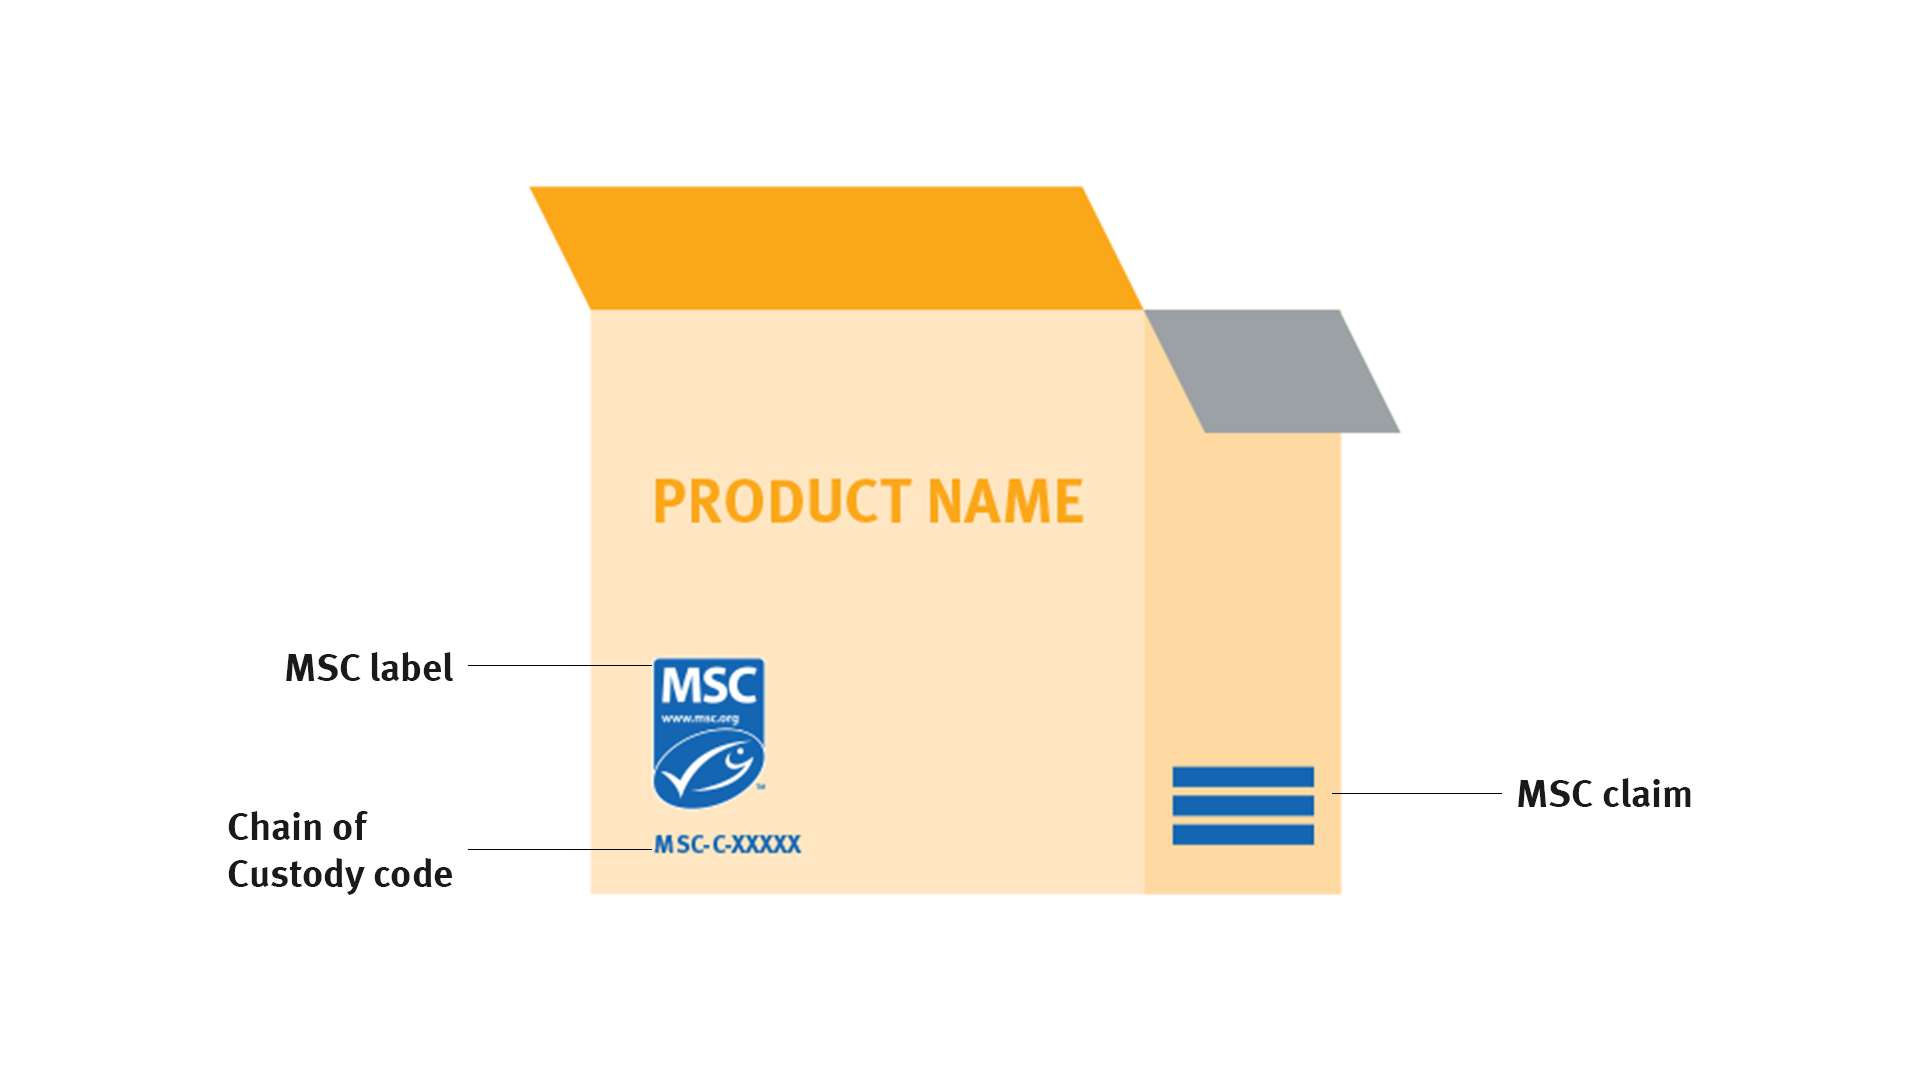 MSC label on product use